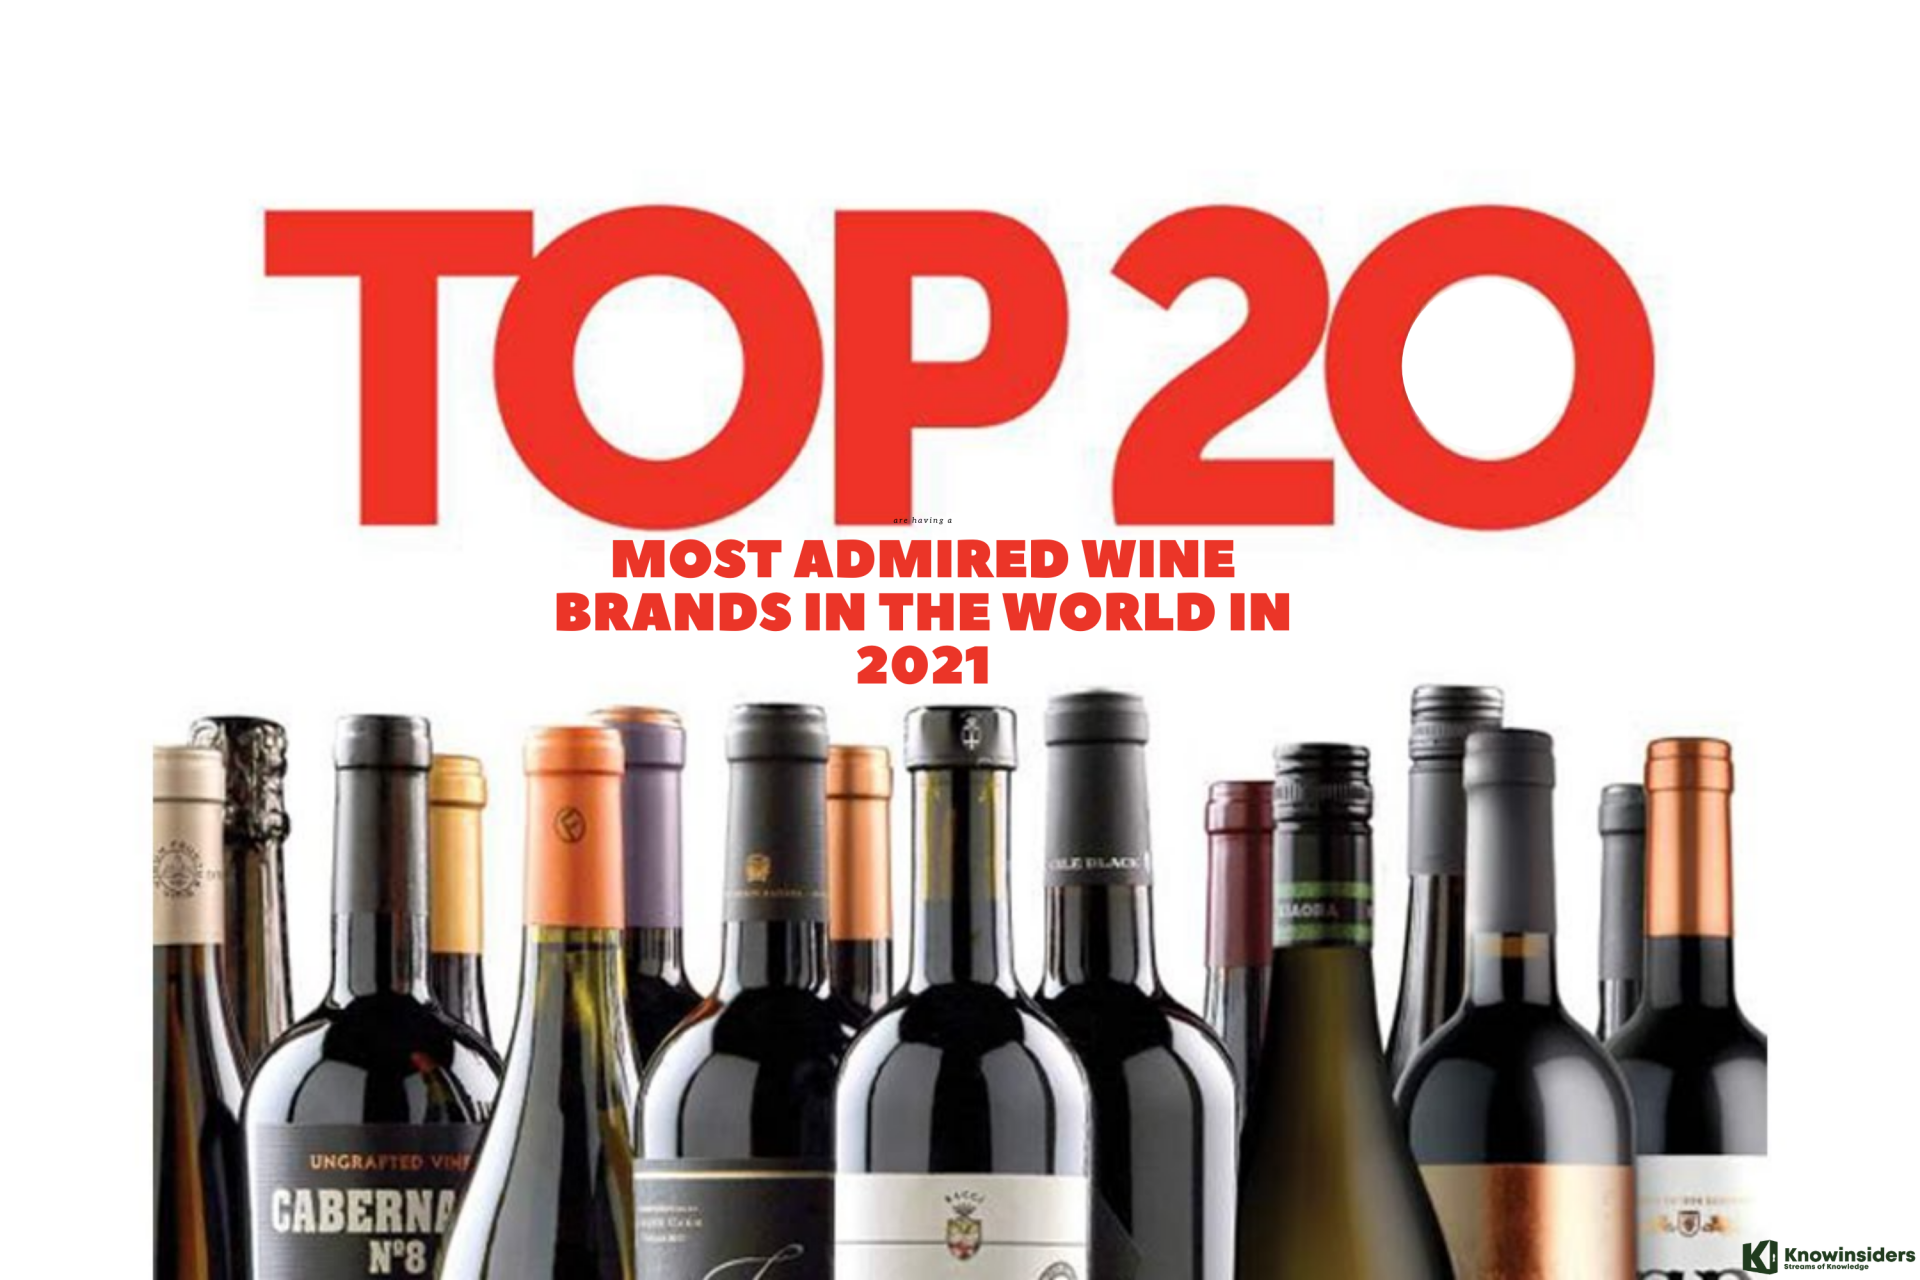 Top 20 Most Admired Wine Brands 2021